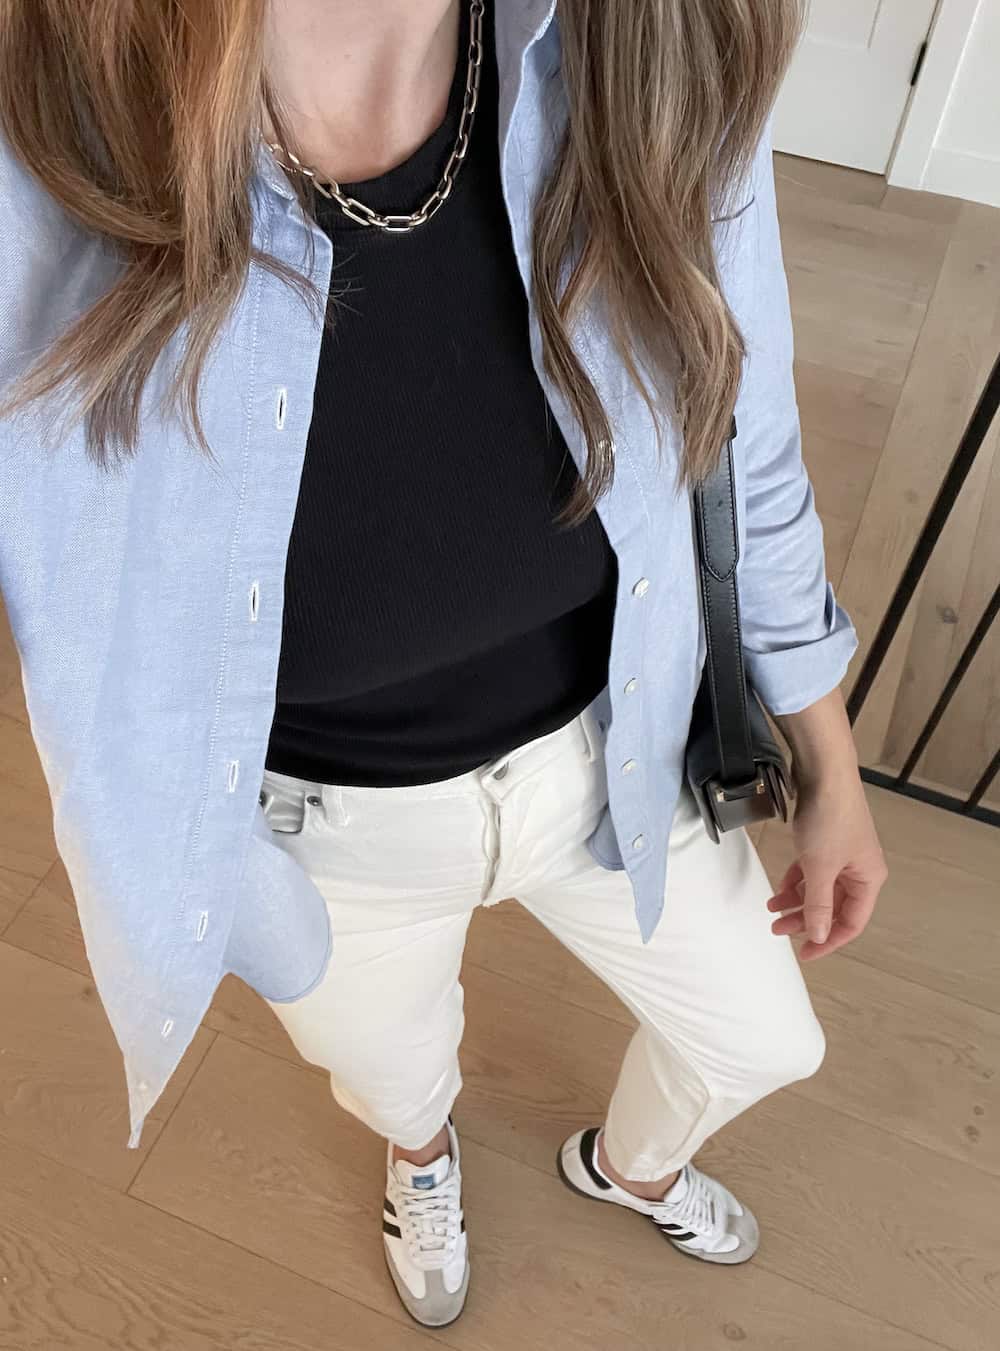 Christal wearing white jeans, a black t-shirt and an oversized blue button down with sneakers.